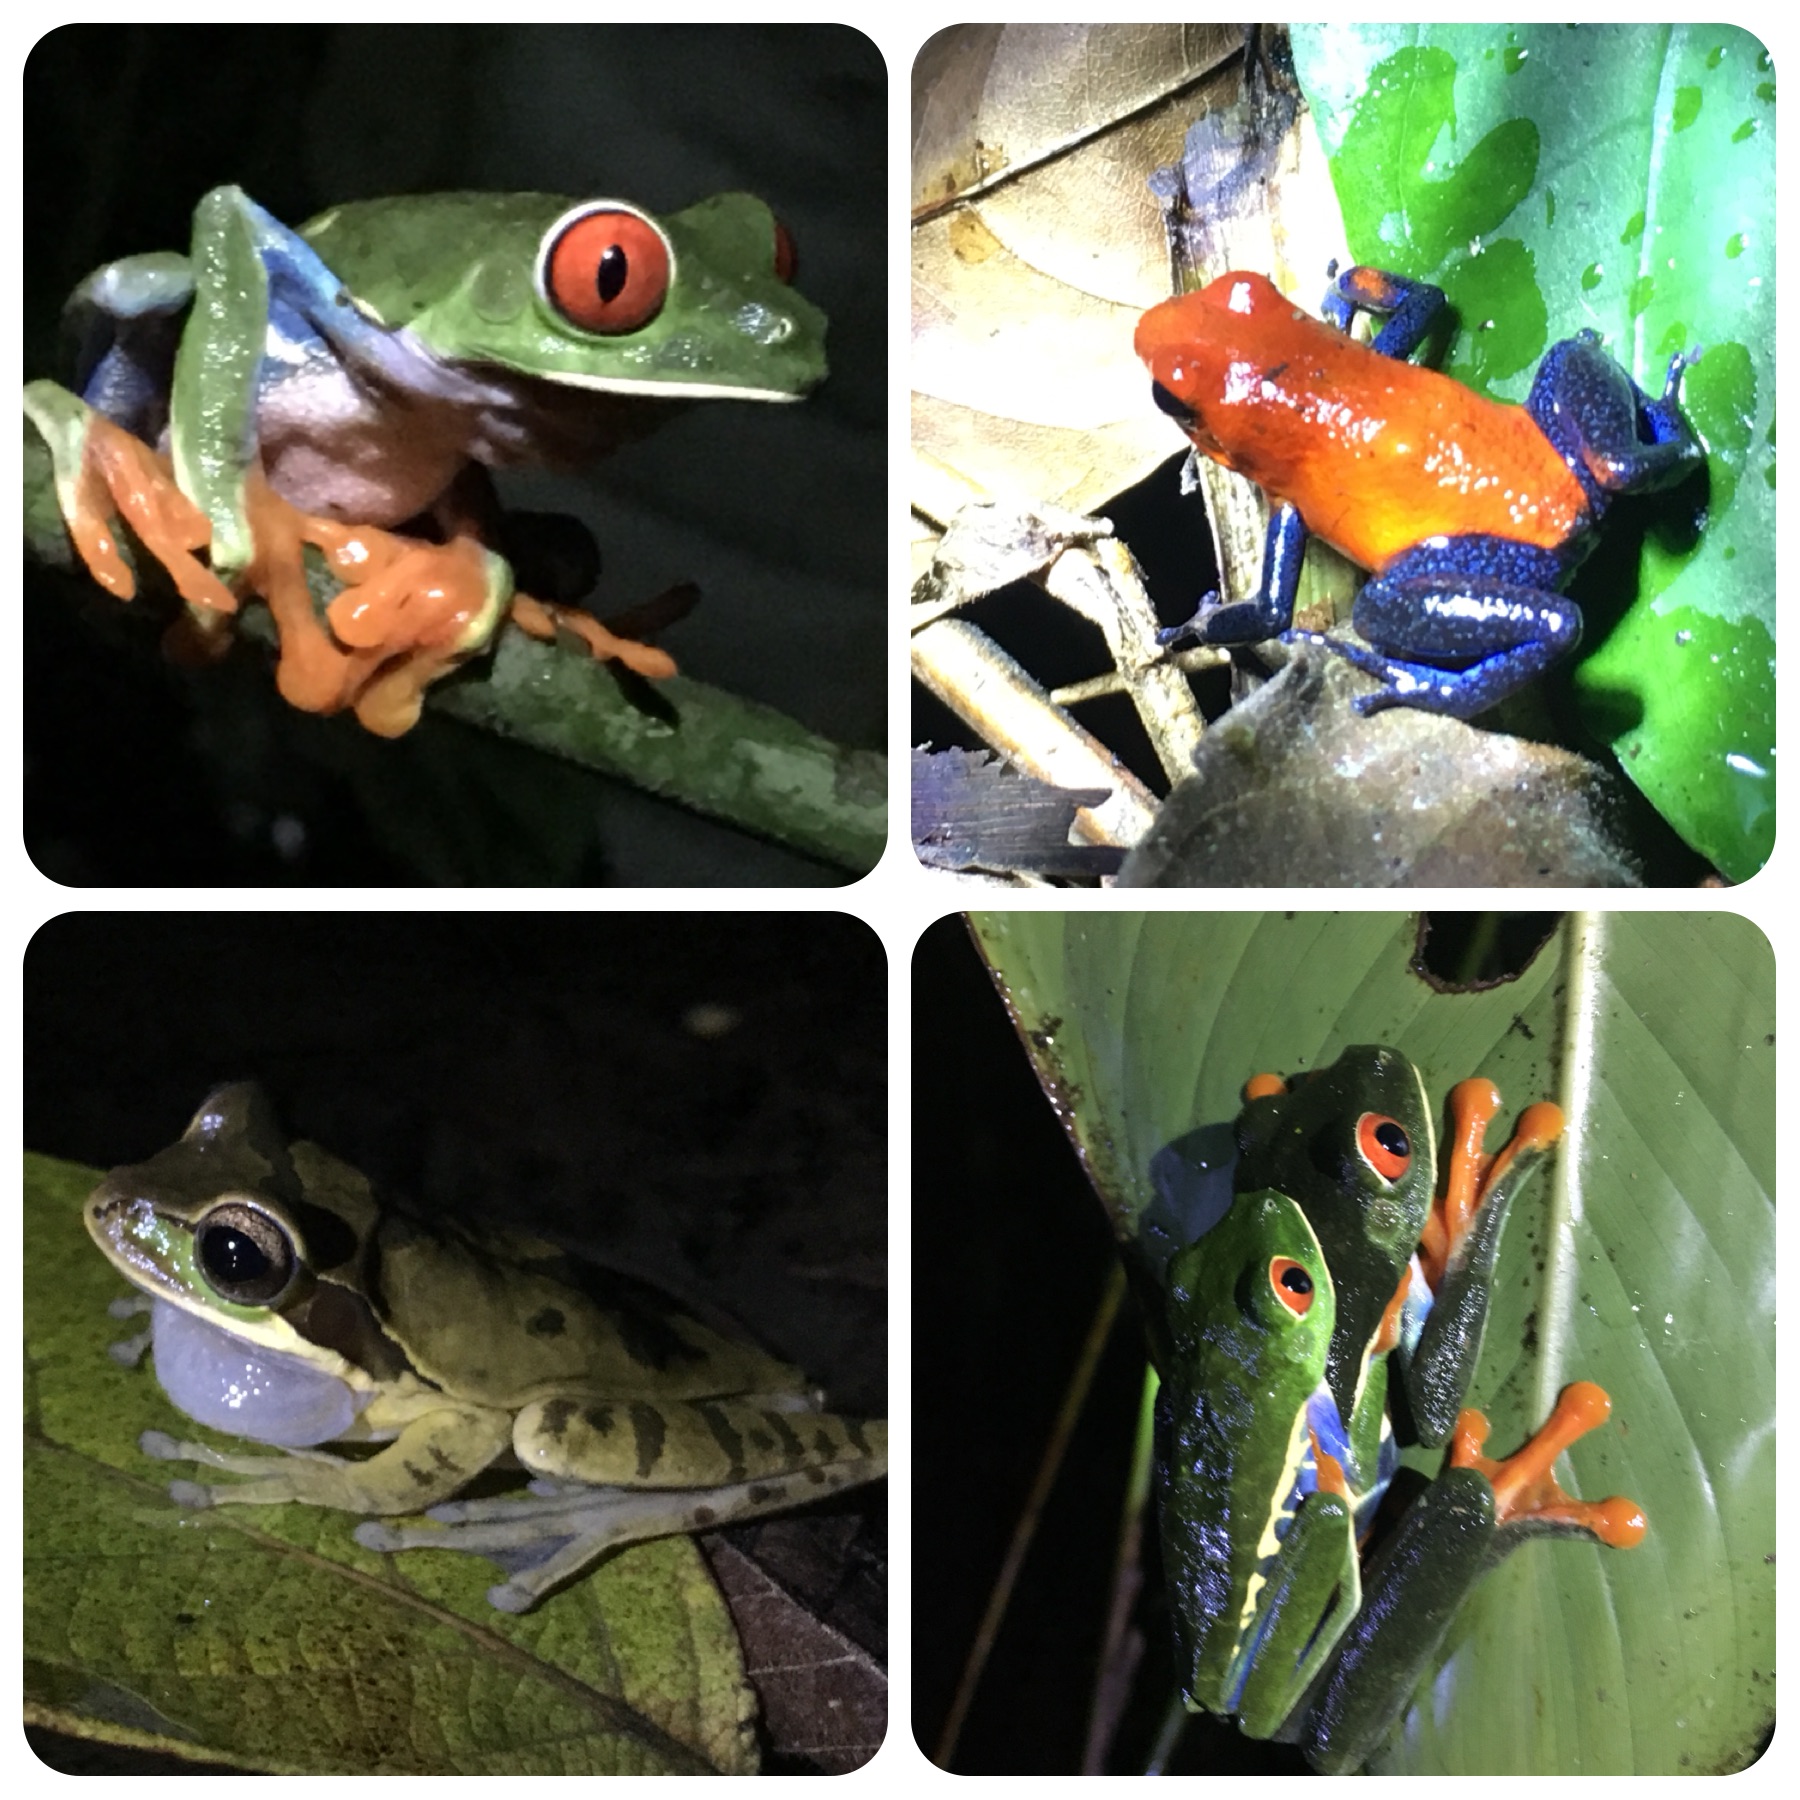 The frogs of Costa Rica